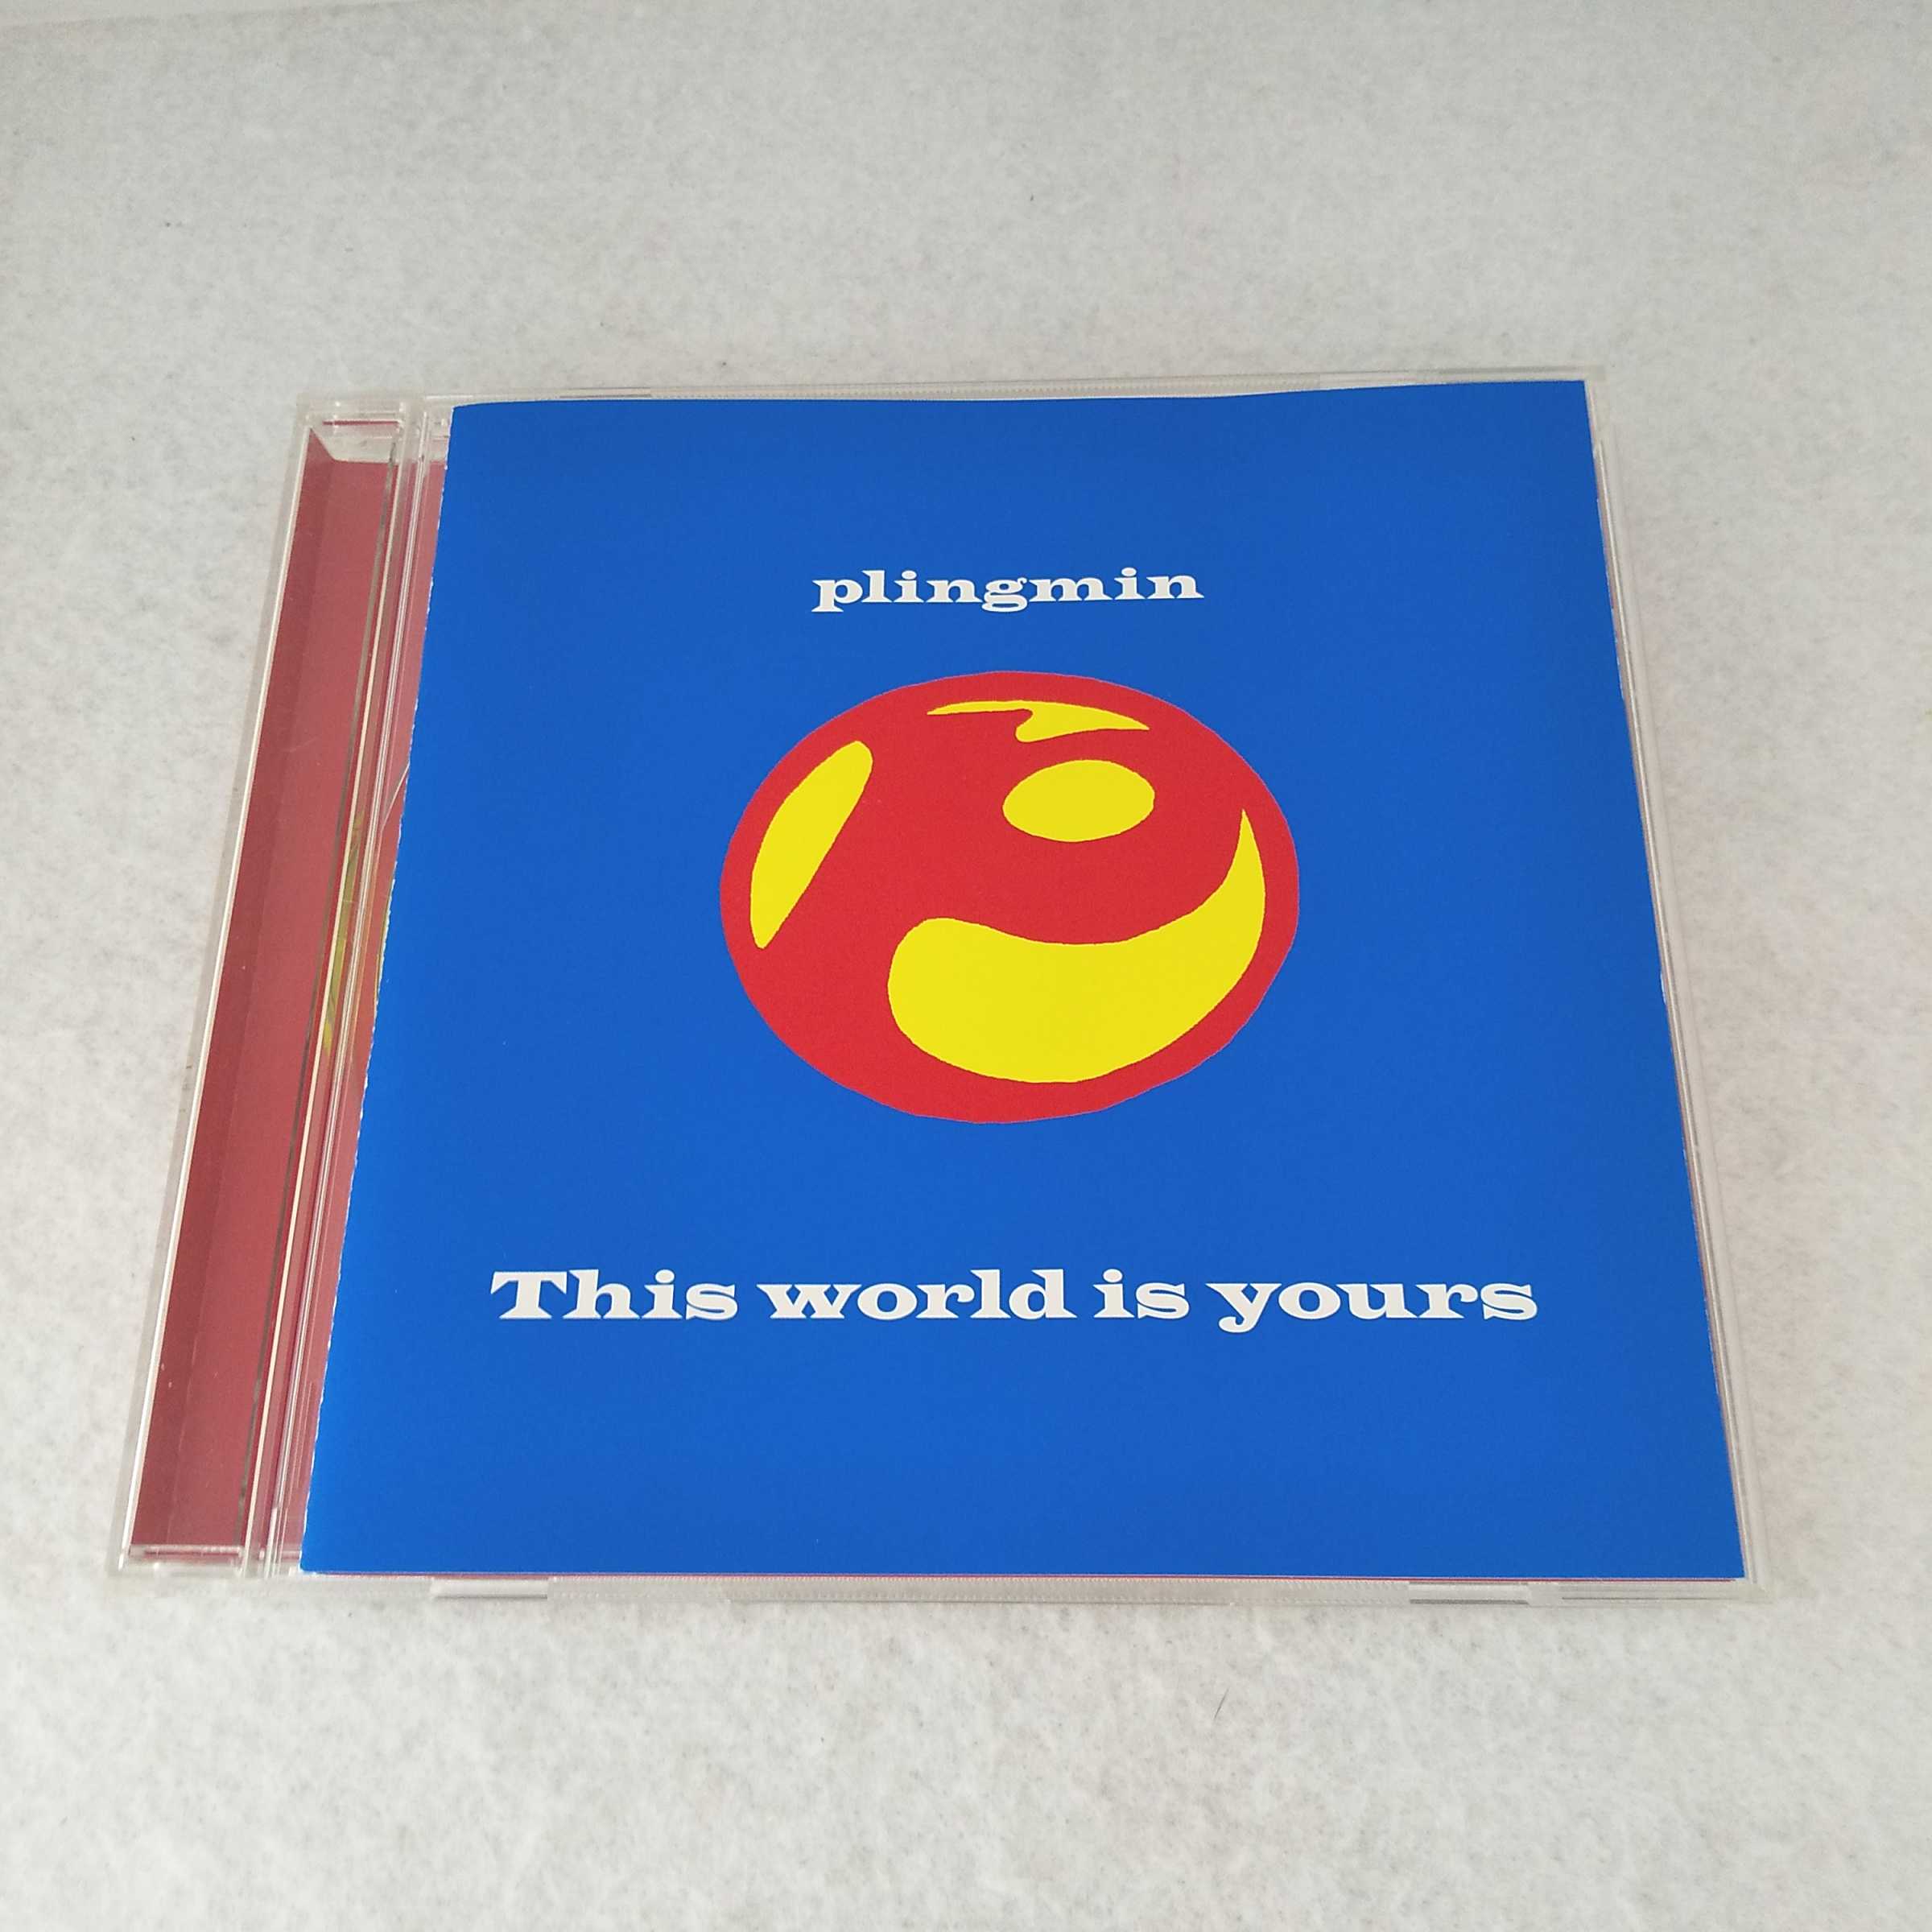 AC09681 【中古】 【CD】 This world is yours/プリングミン